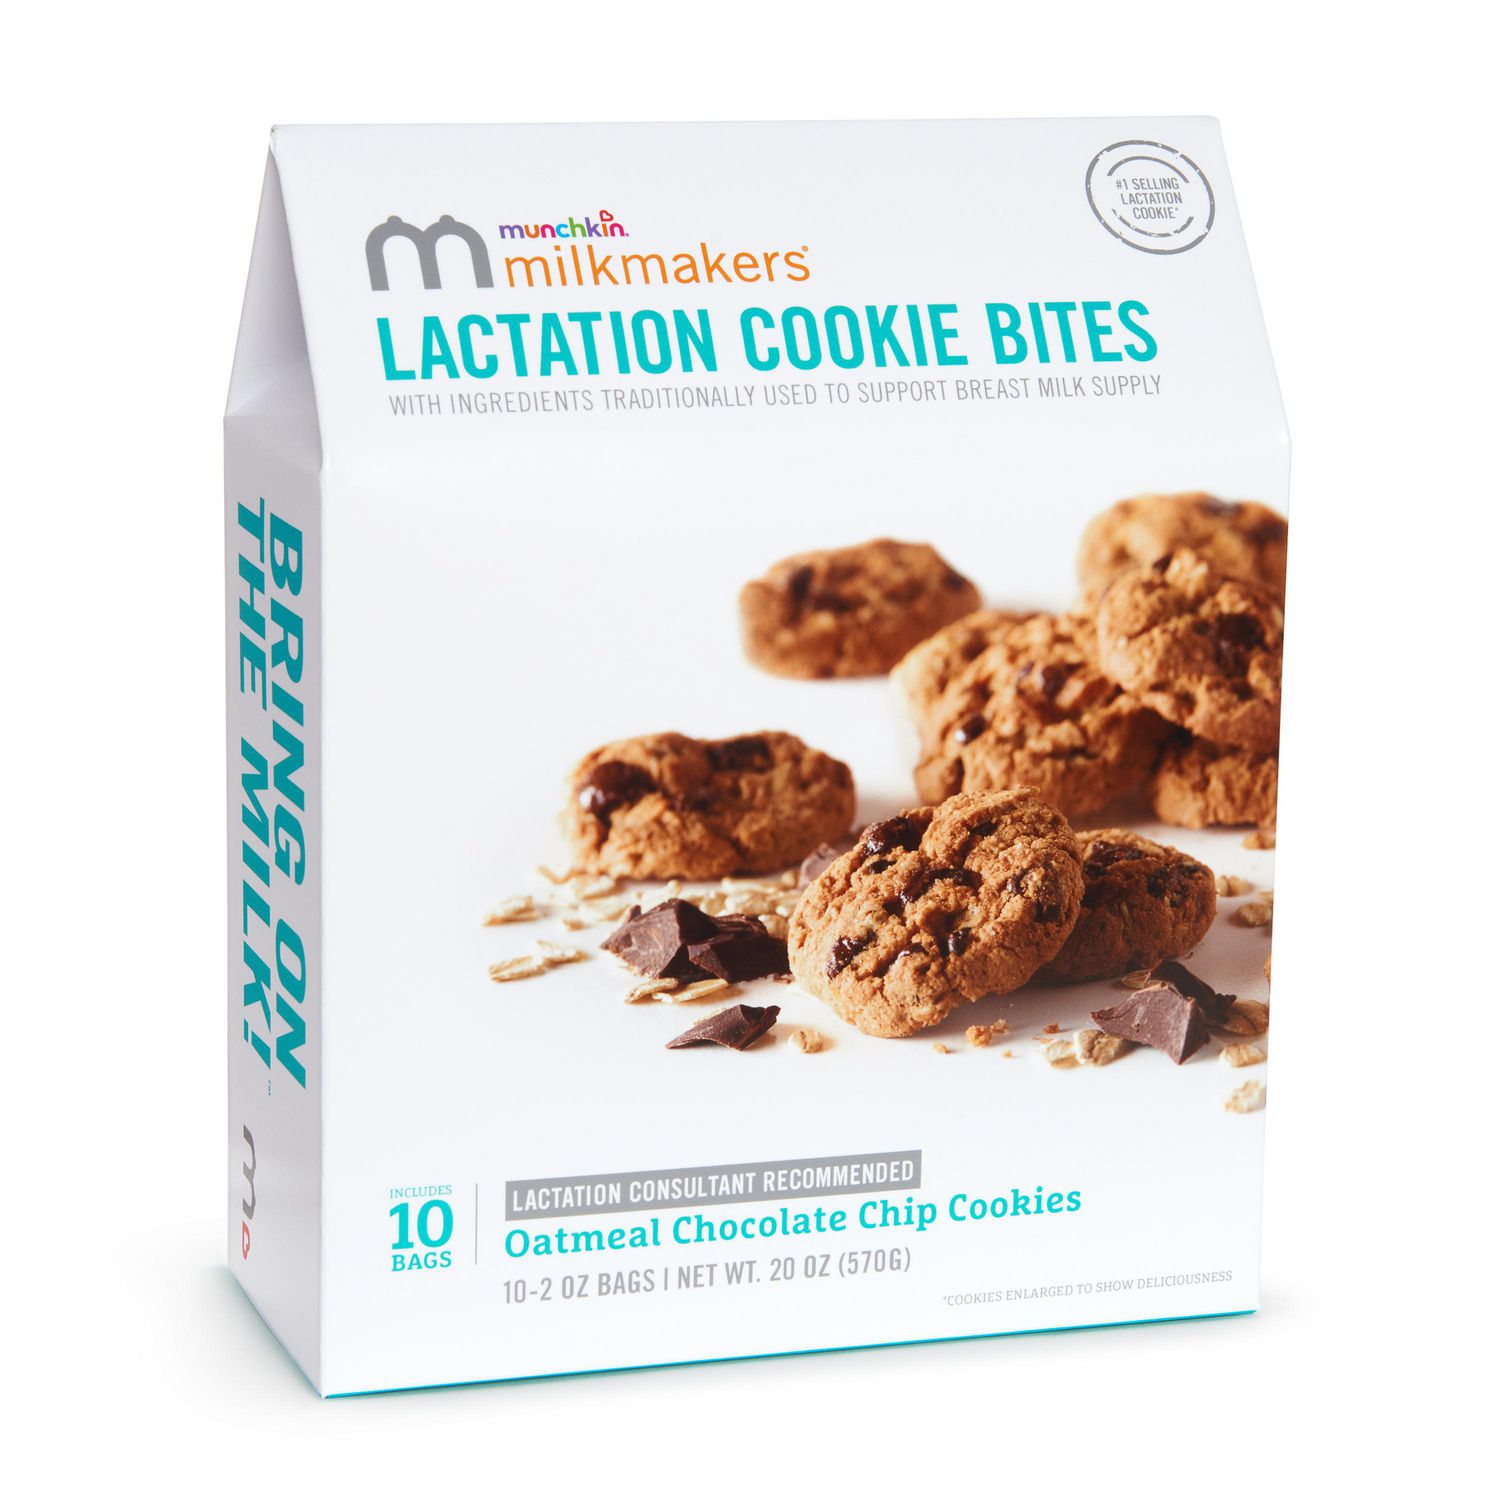 Chocolate　Chip　Lactation　Milkmakers　10　Bites,　Count,　Oatmeal　Cookies　Cookie　Lactation